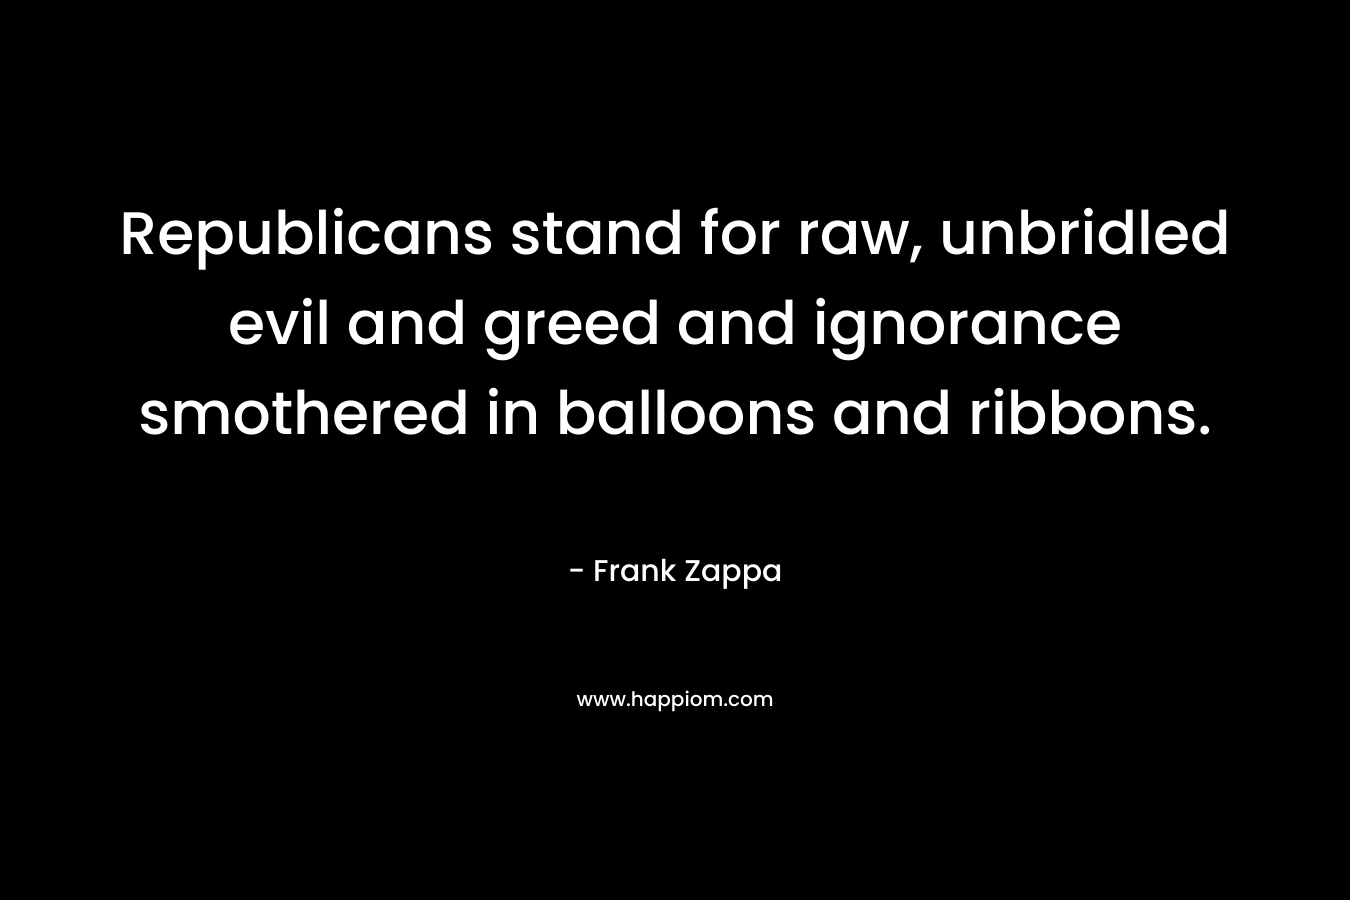 Republicans stand for raw, unbridled evil and greed and ignorance smothered in balloons and ribbons.